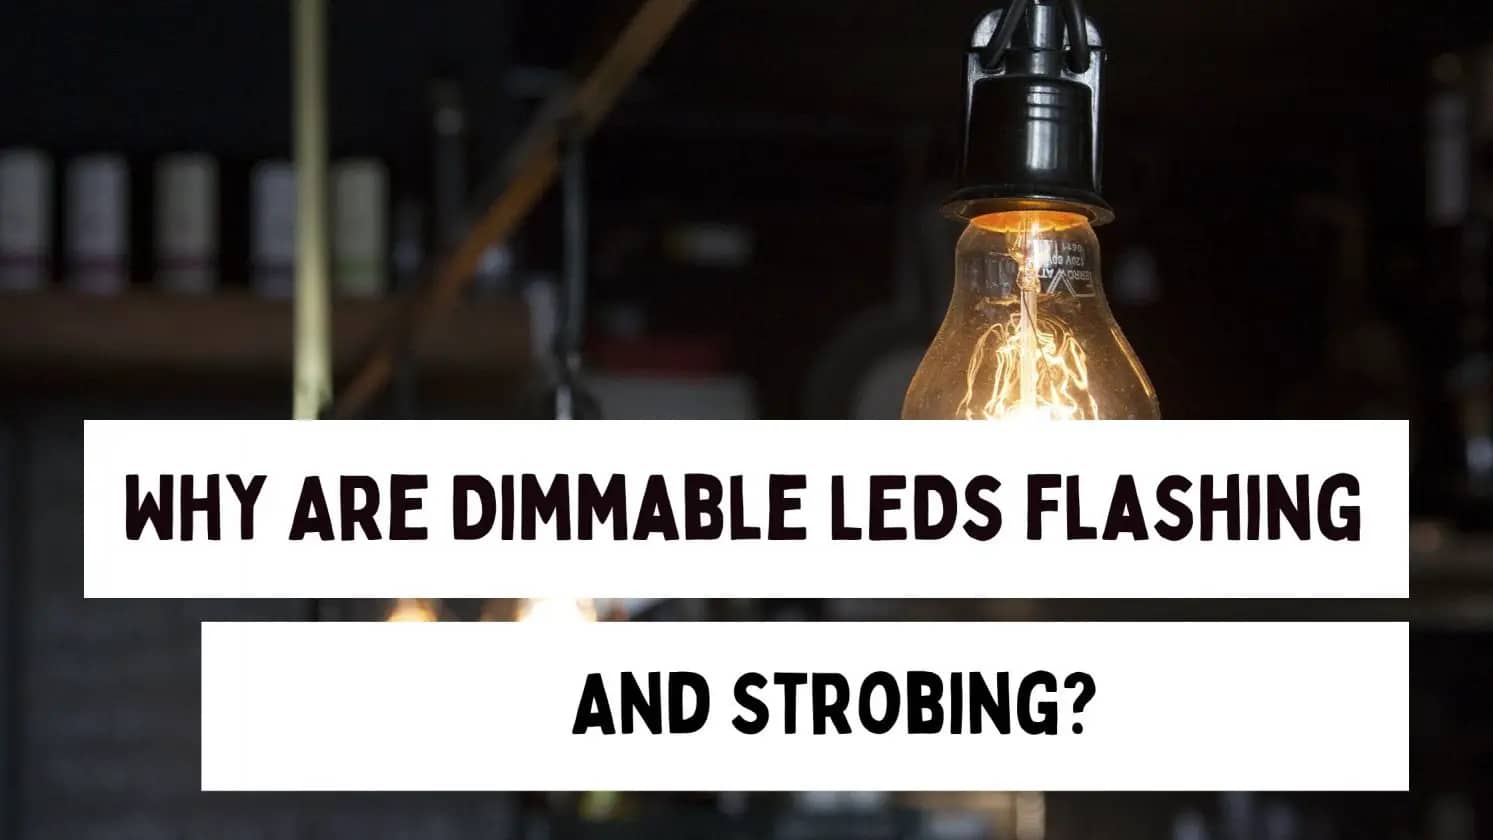 dimmable led flash